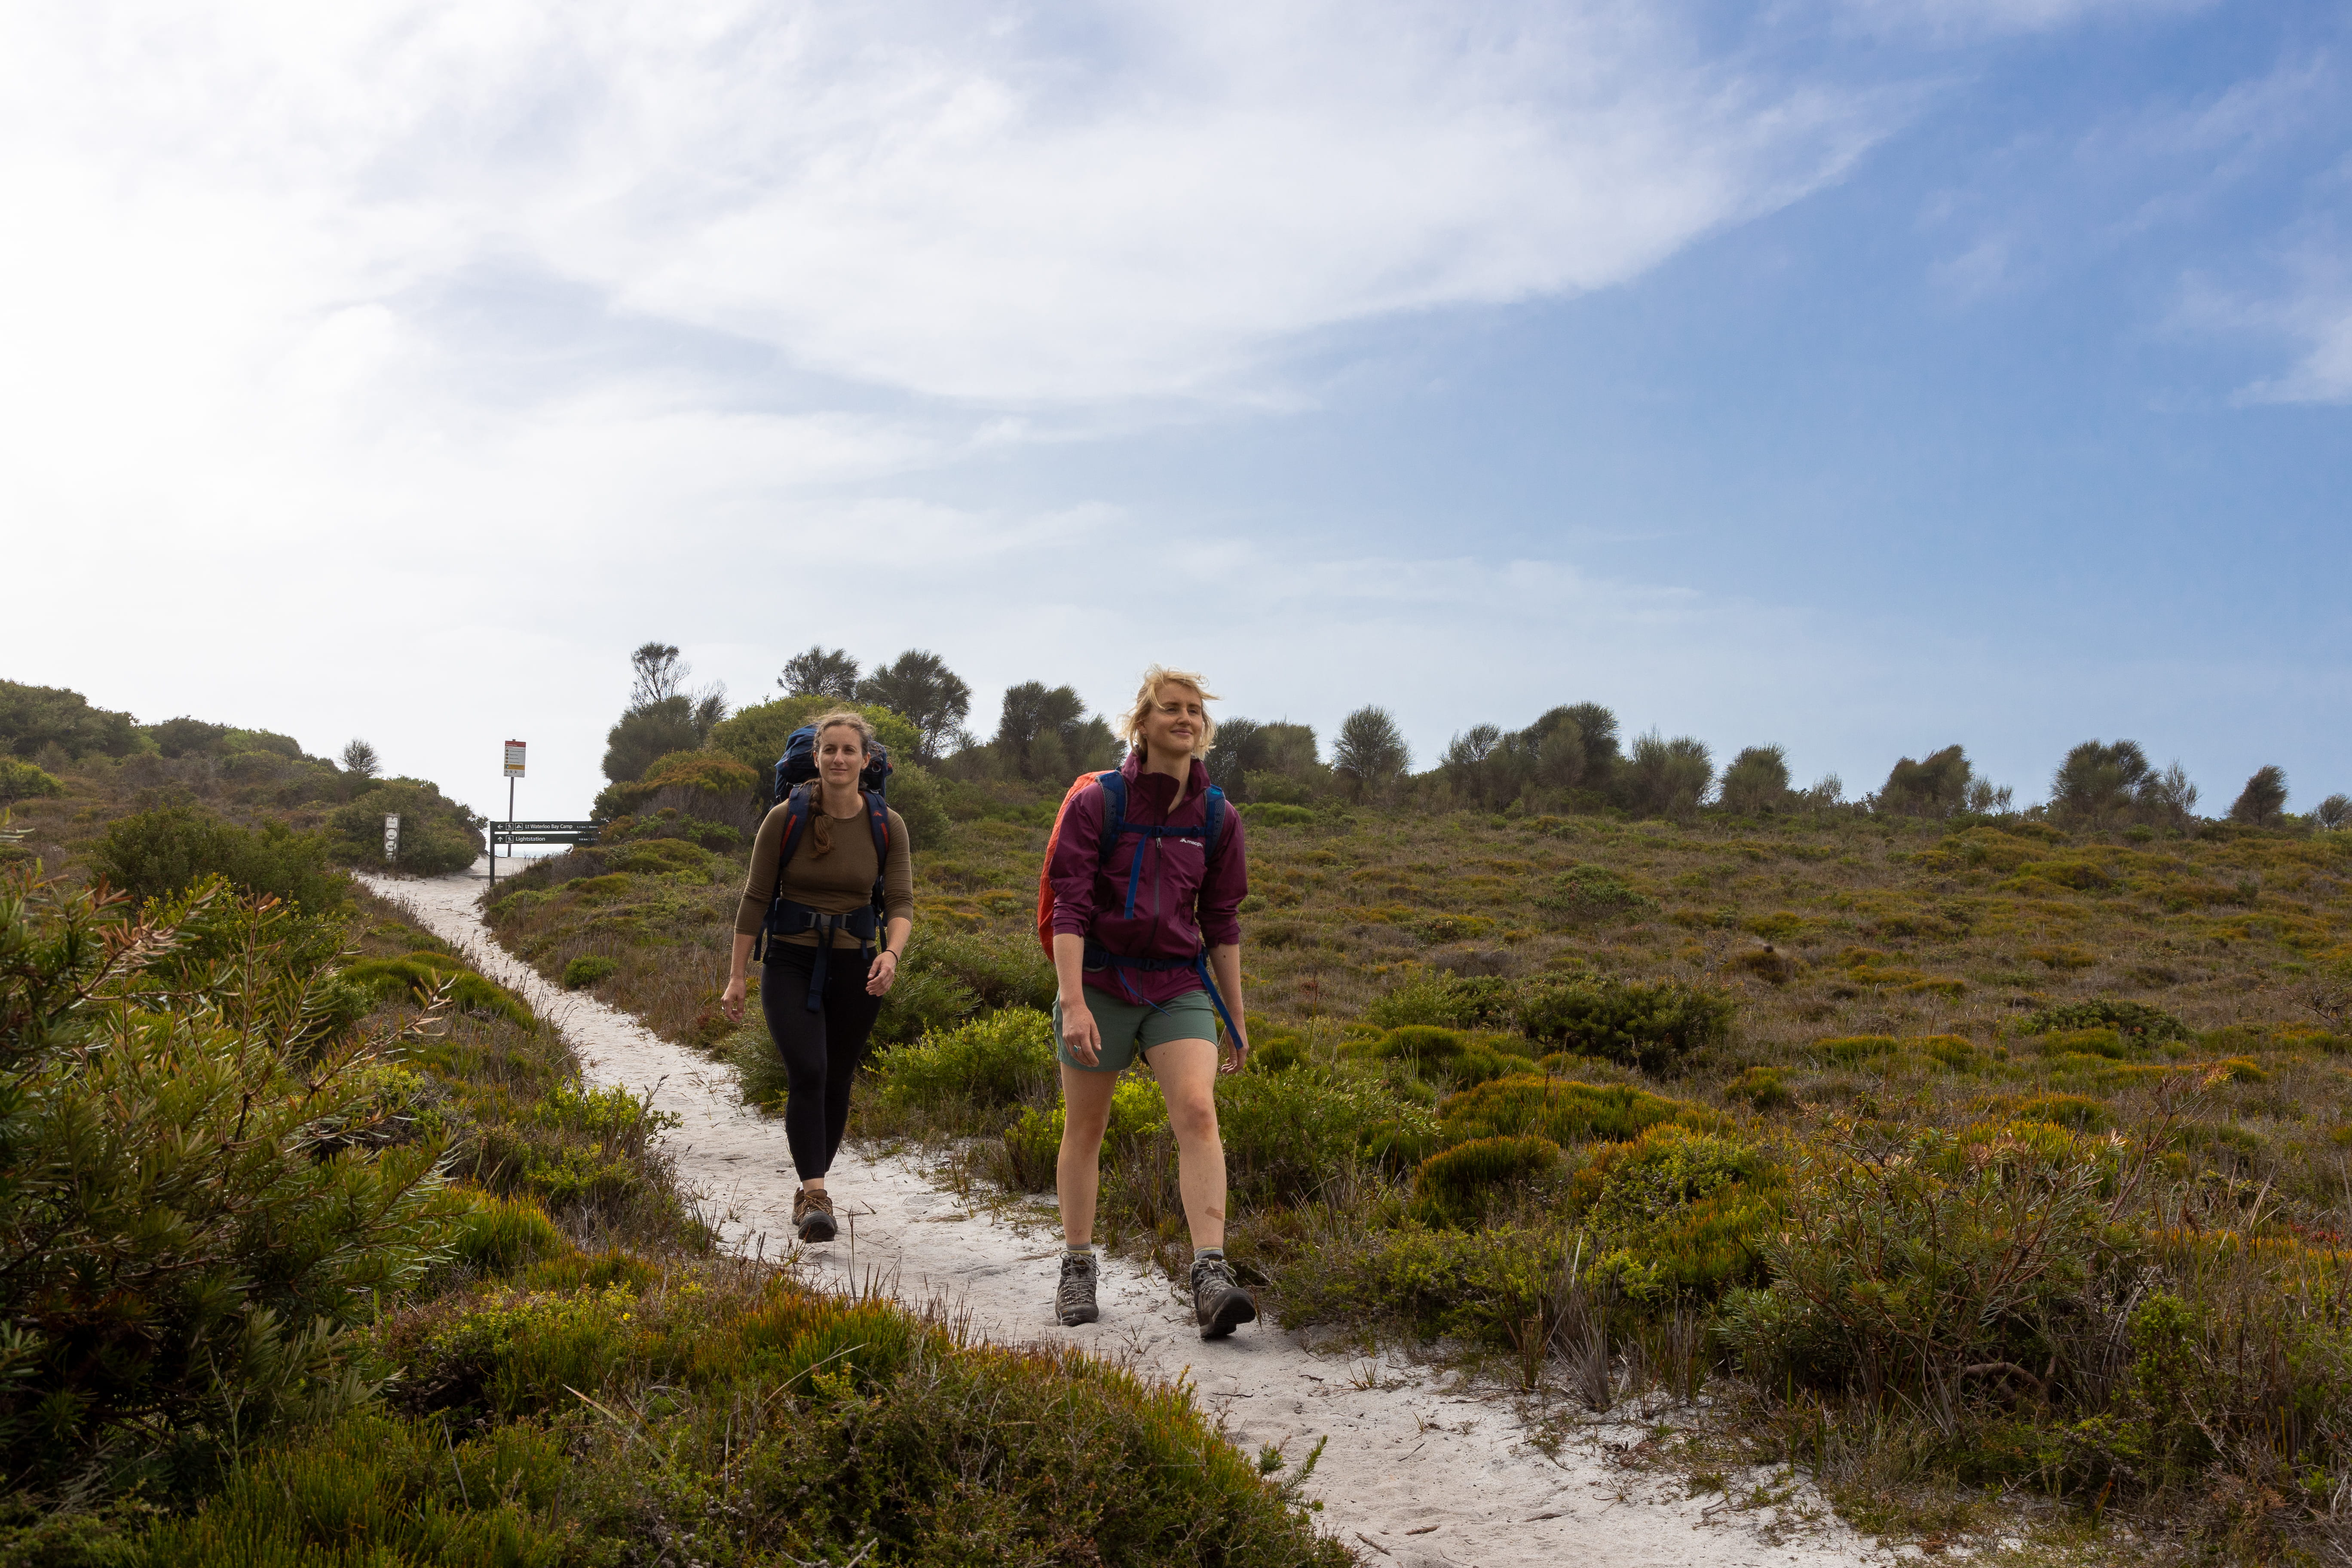 Two women walk along the track next to a coastal marsh on the Southern Circuit hiking trail at Wilsons Promontory National Park